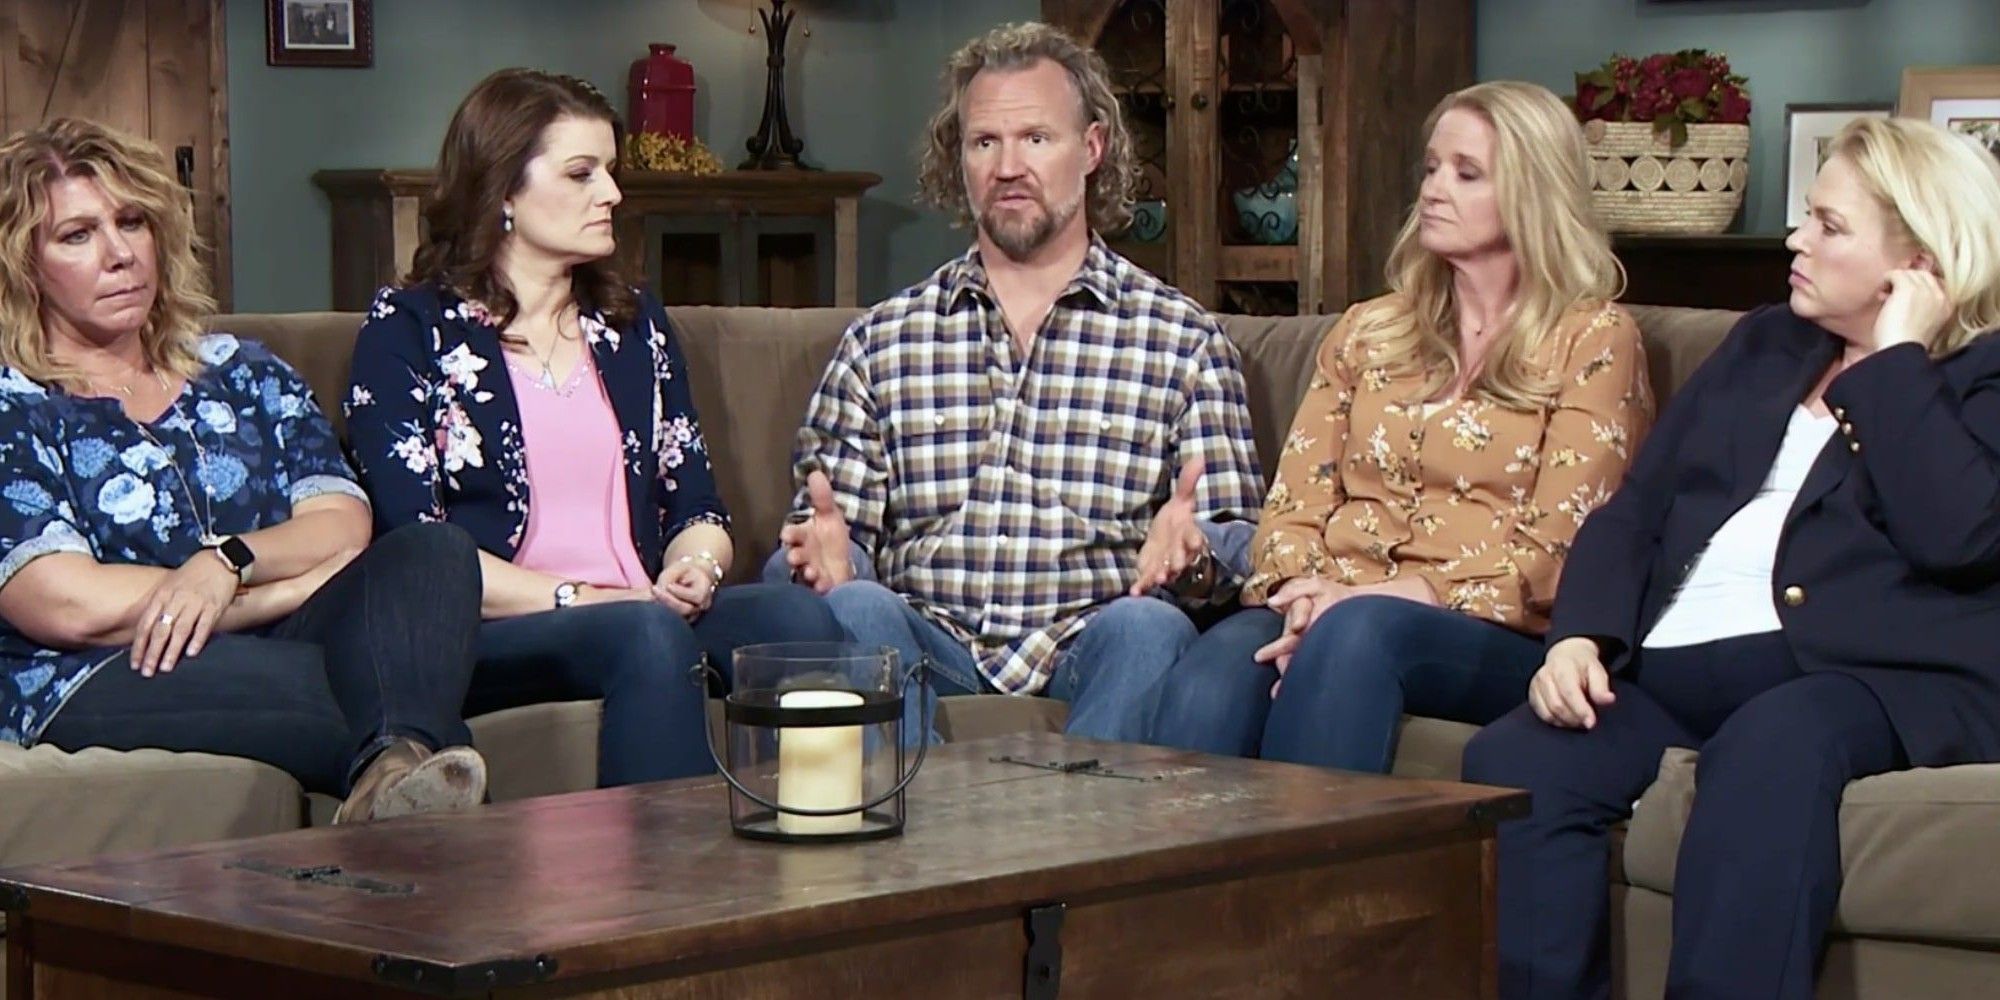 Sister Wives: Know About The 'My Sisterwife's Closet' Company